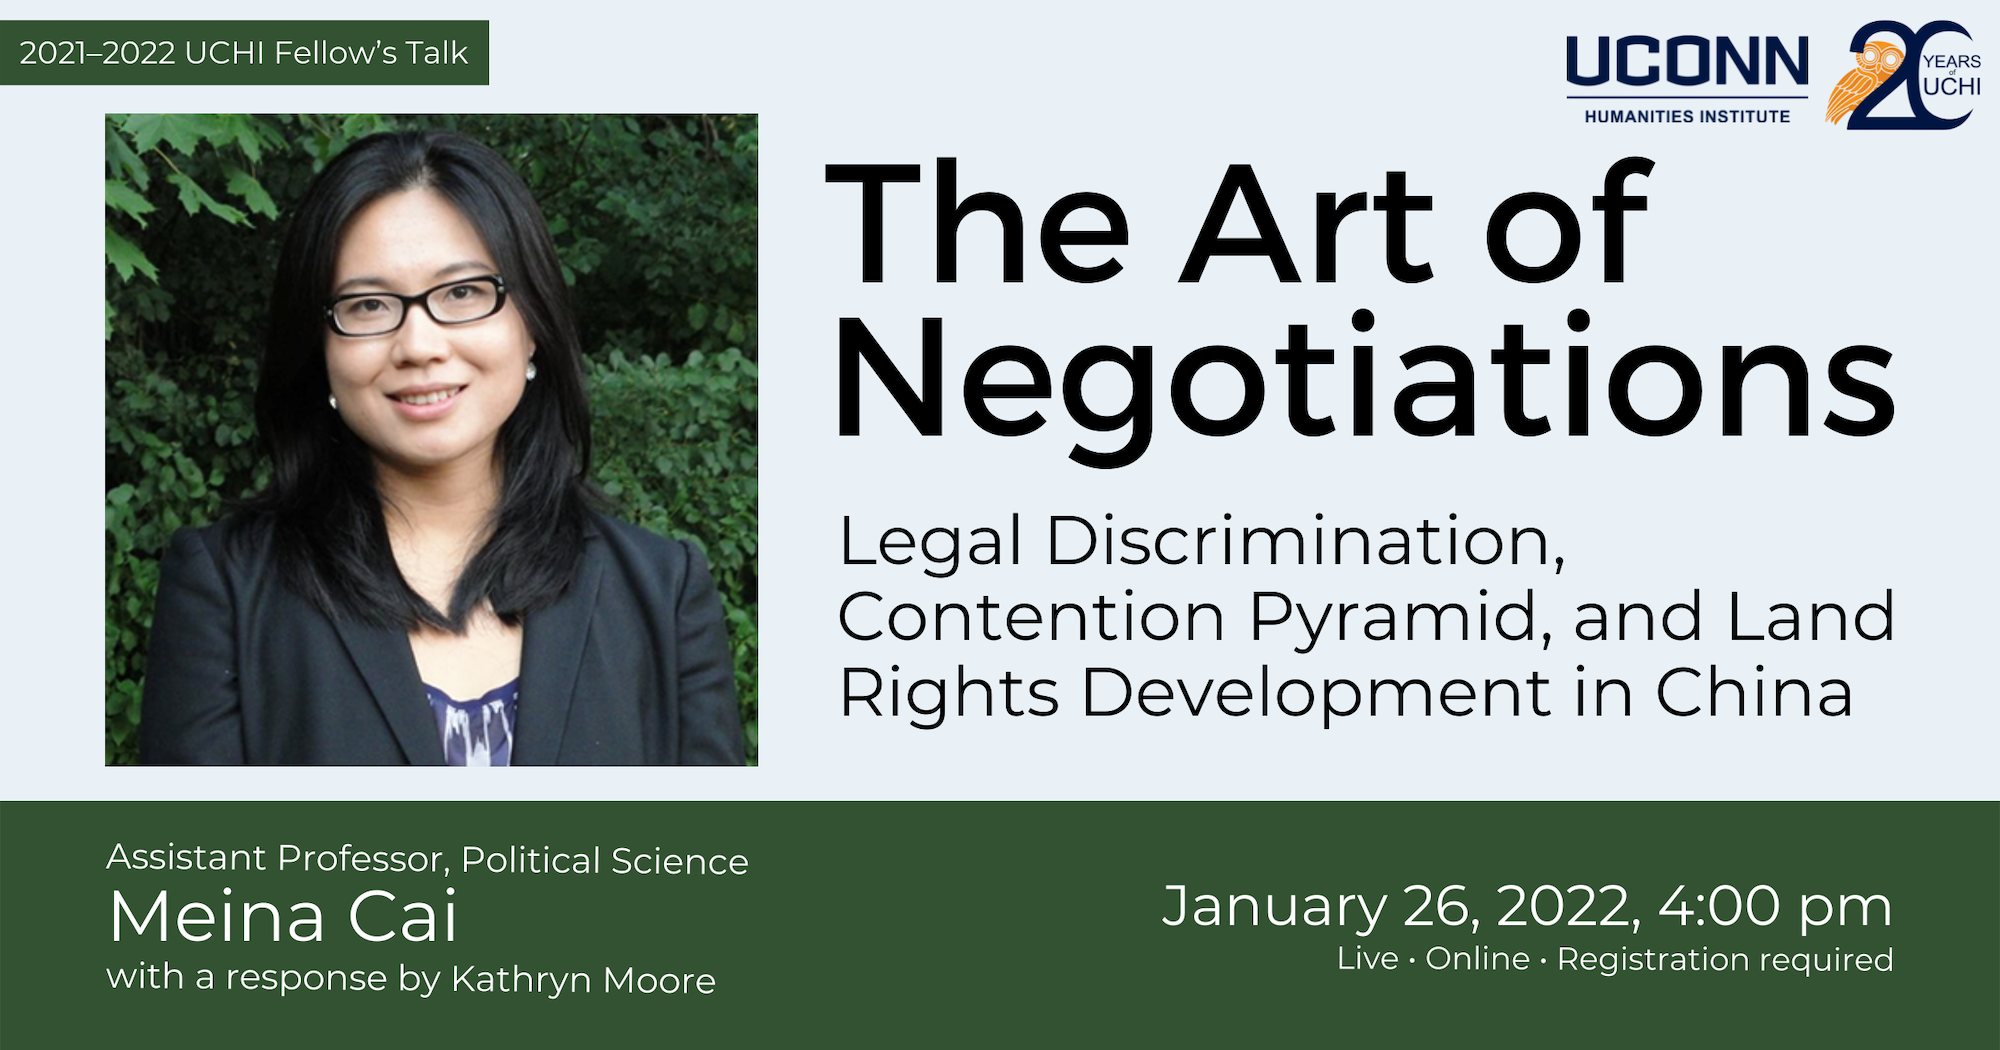 2021–22 UCHI Fellow's Talk. The Art of Negotiations: Legal Discrimination, the Contention Pyramid, and Land Rights Development in China. Assistant Professor, Political Science Meina Cai, with a response by Kathryn Moore. January 26, 2022, 4:00pm. Live. Online. Registration required.